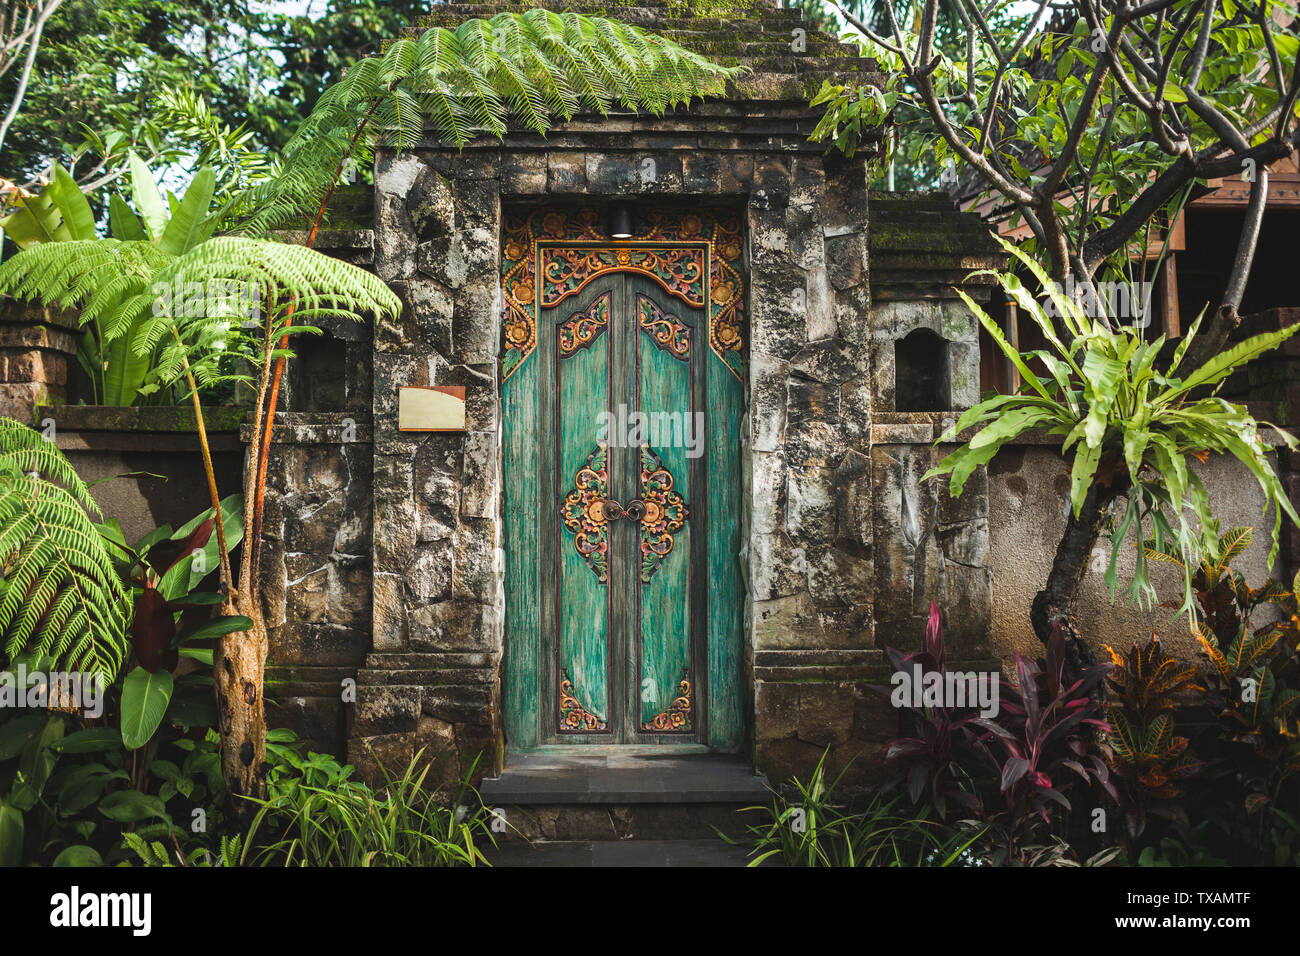 Traditional balinese handmade carved wooden door. Bali style furniture with ornament details Stock Photo